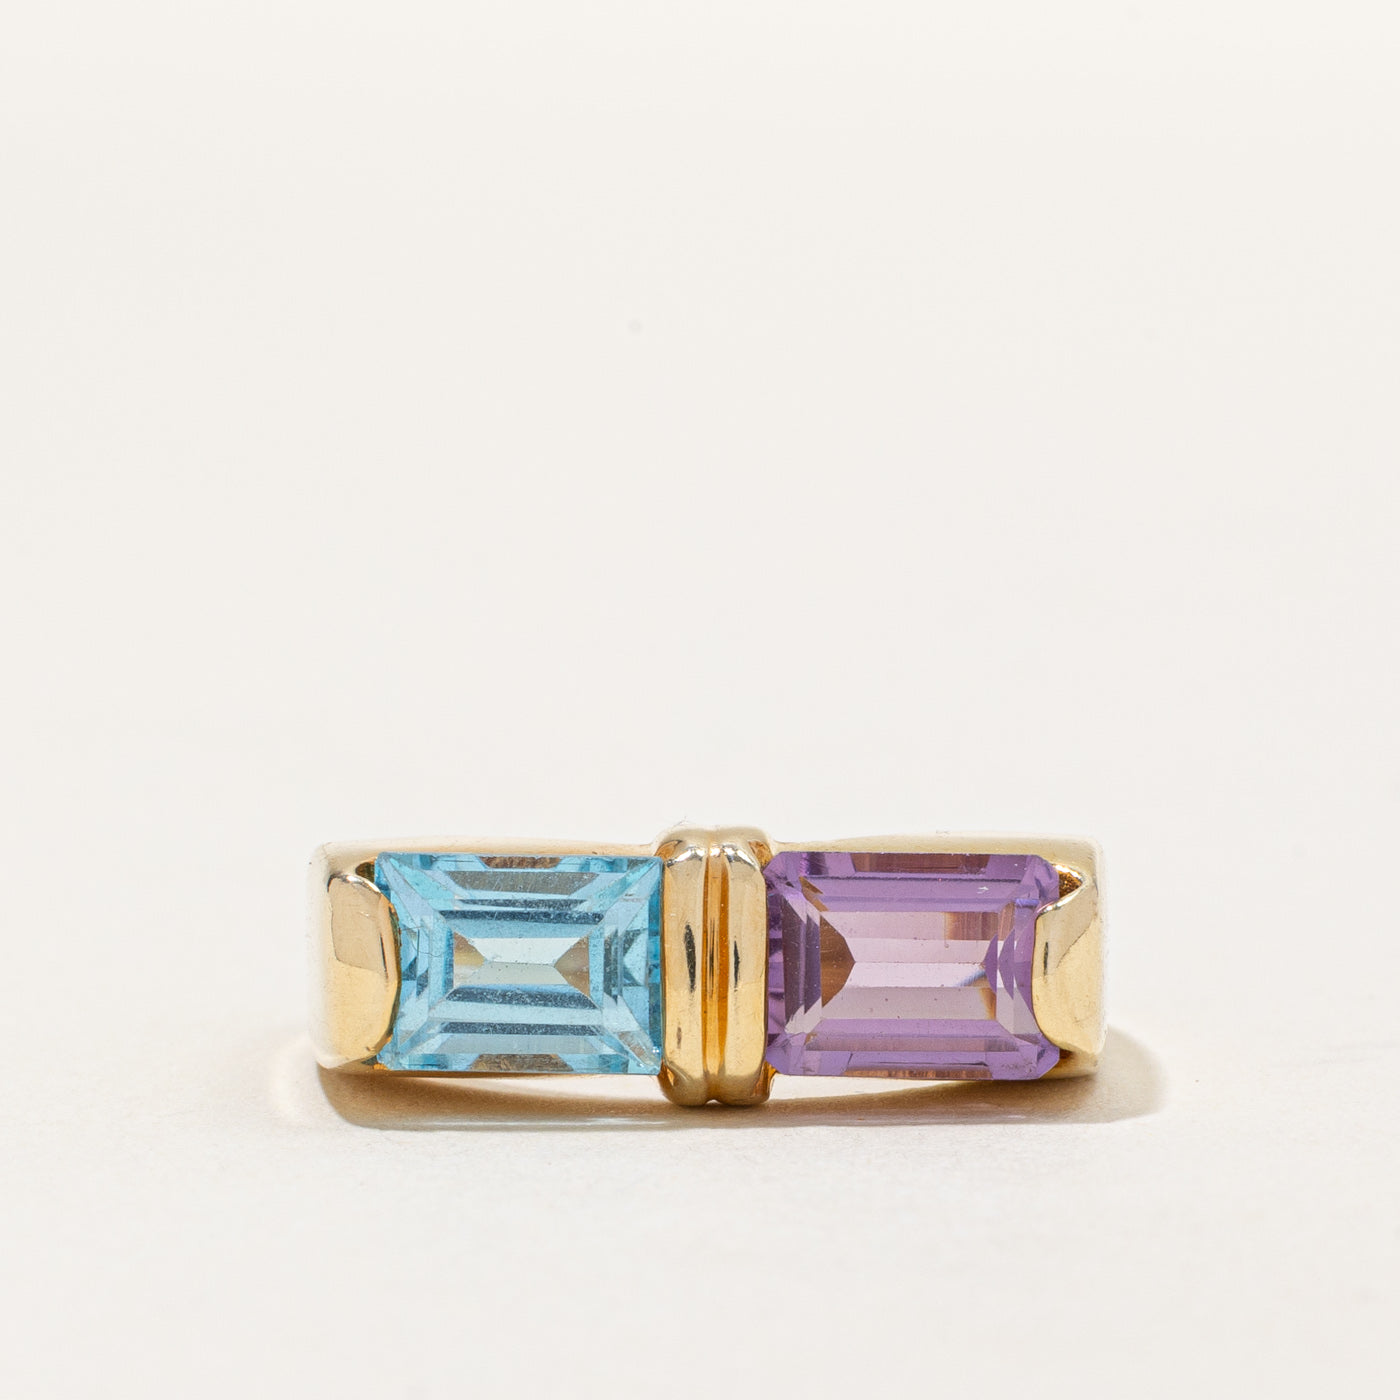 Topaz & Amethyst Cocktail Ring | 1.40ct, 1.00ct | SZ 8.25 |